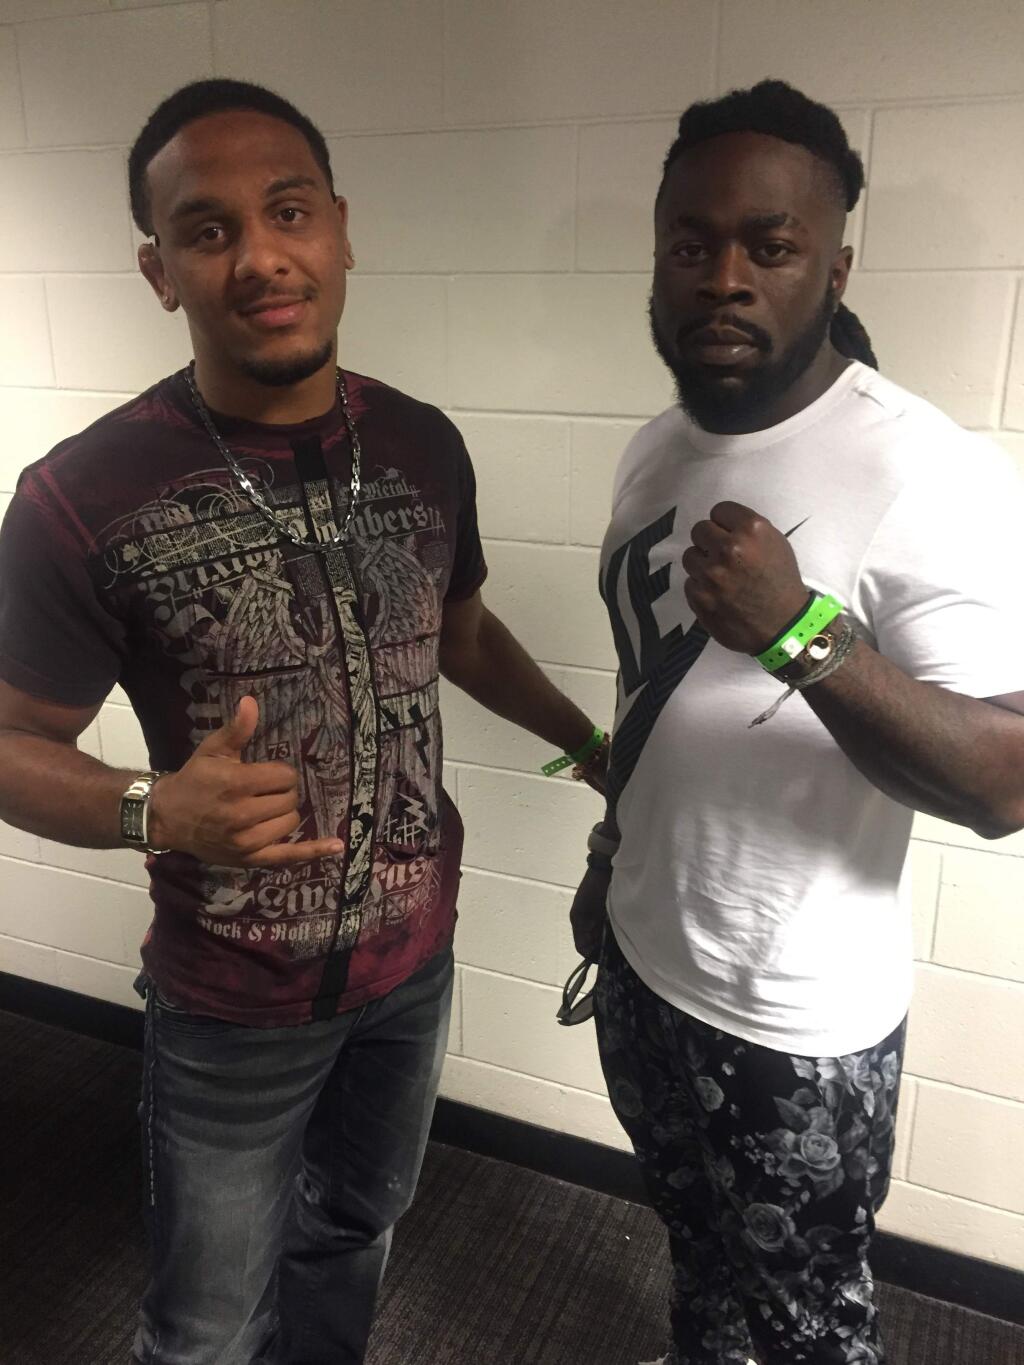 In this May 14, 2016, photo provided by Bellator MMA, mixed martial artist Kevin Ferguson Jr., right, poses for a photo with fellow fighter A.J. McKee after attending a Bellator fight card in San Jose, Calif. Ferguson, the oldest son of late fighting icon Kimbo Slice, will make his professional mixed martial arts debut next month for the Bellator promotion, The Associated Press learned Monday, July 25, 2016. (Bellator MMA via AP)